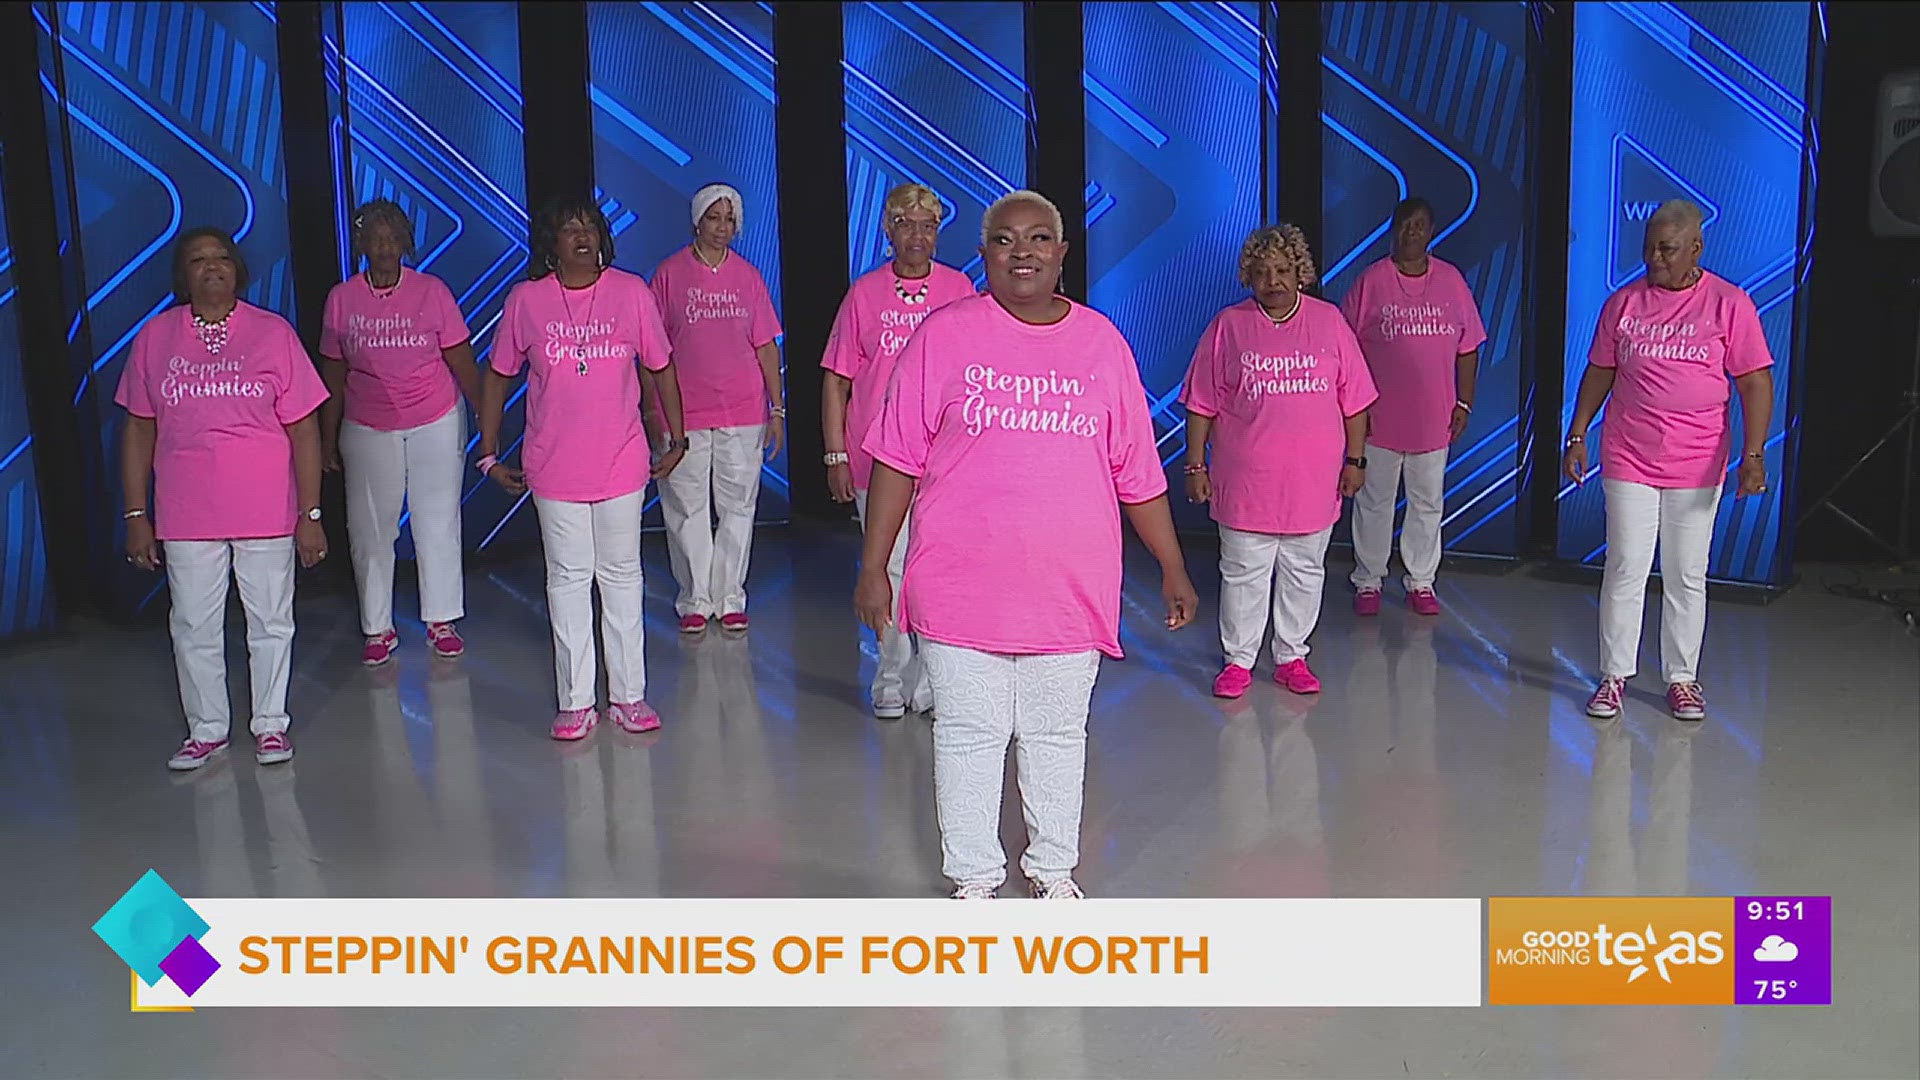 Groove with the Steppin' Grannies of Fort Worth. Go to @steppingrannies2006 for more information.